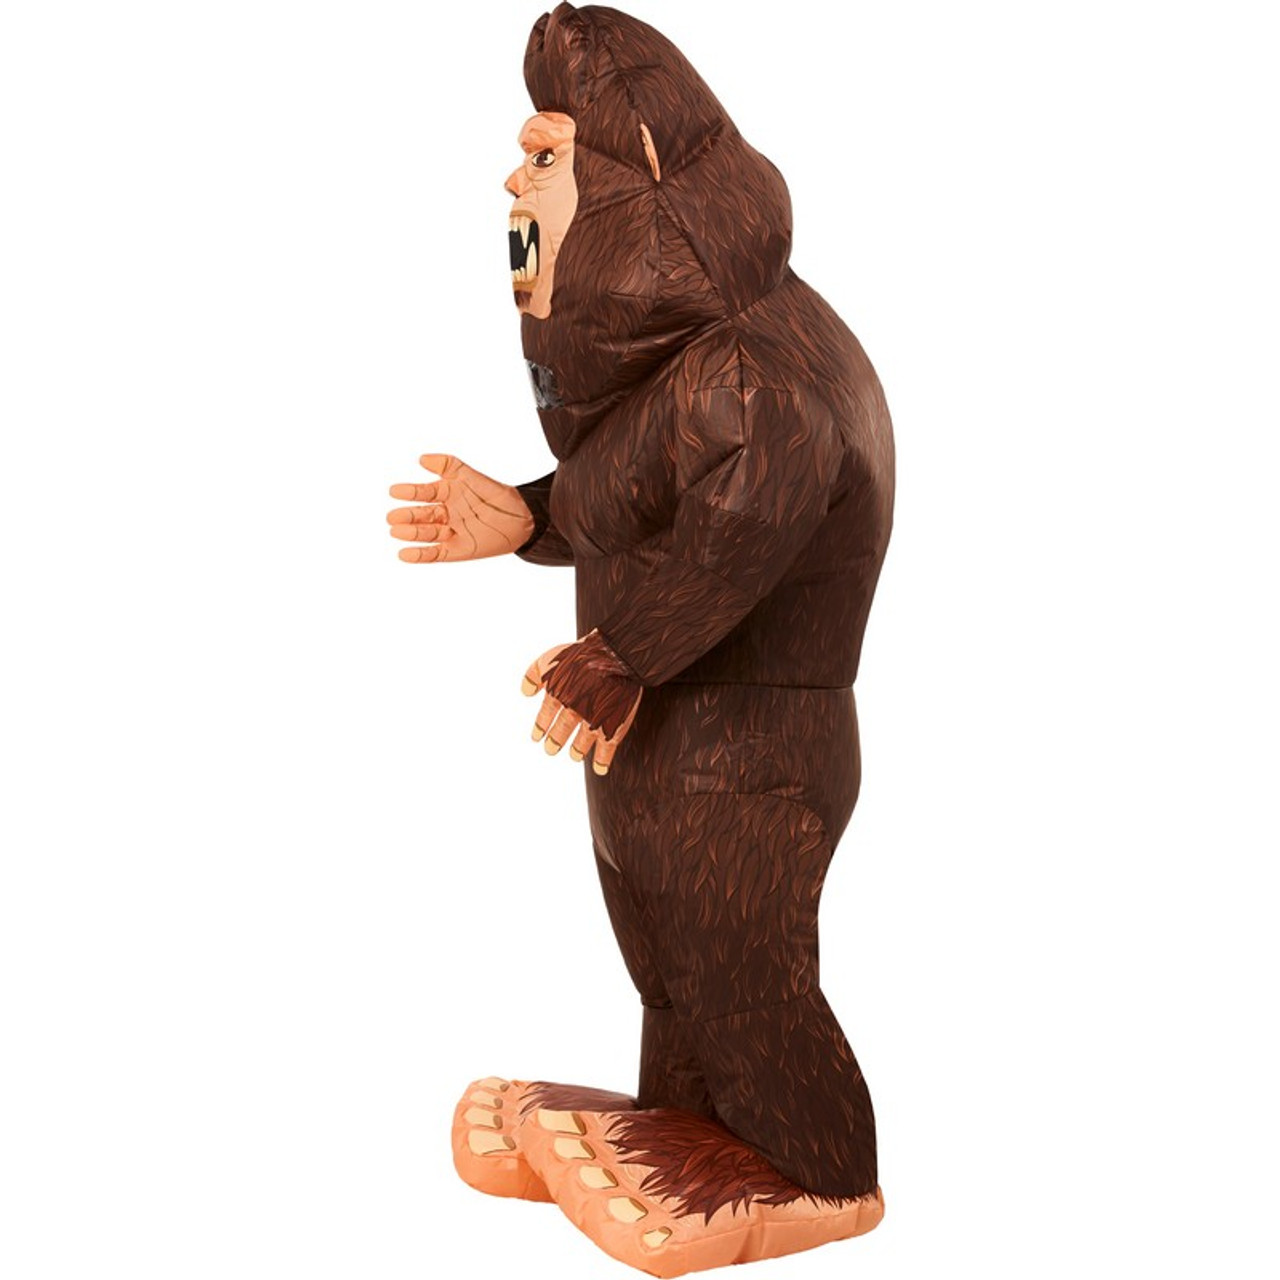 Adult Big Foot Inflatable Costume Inset